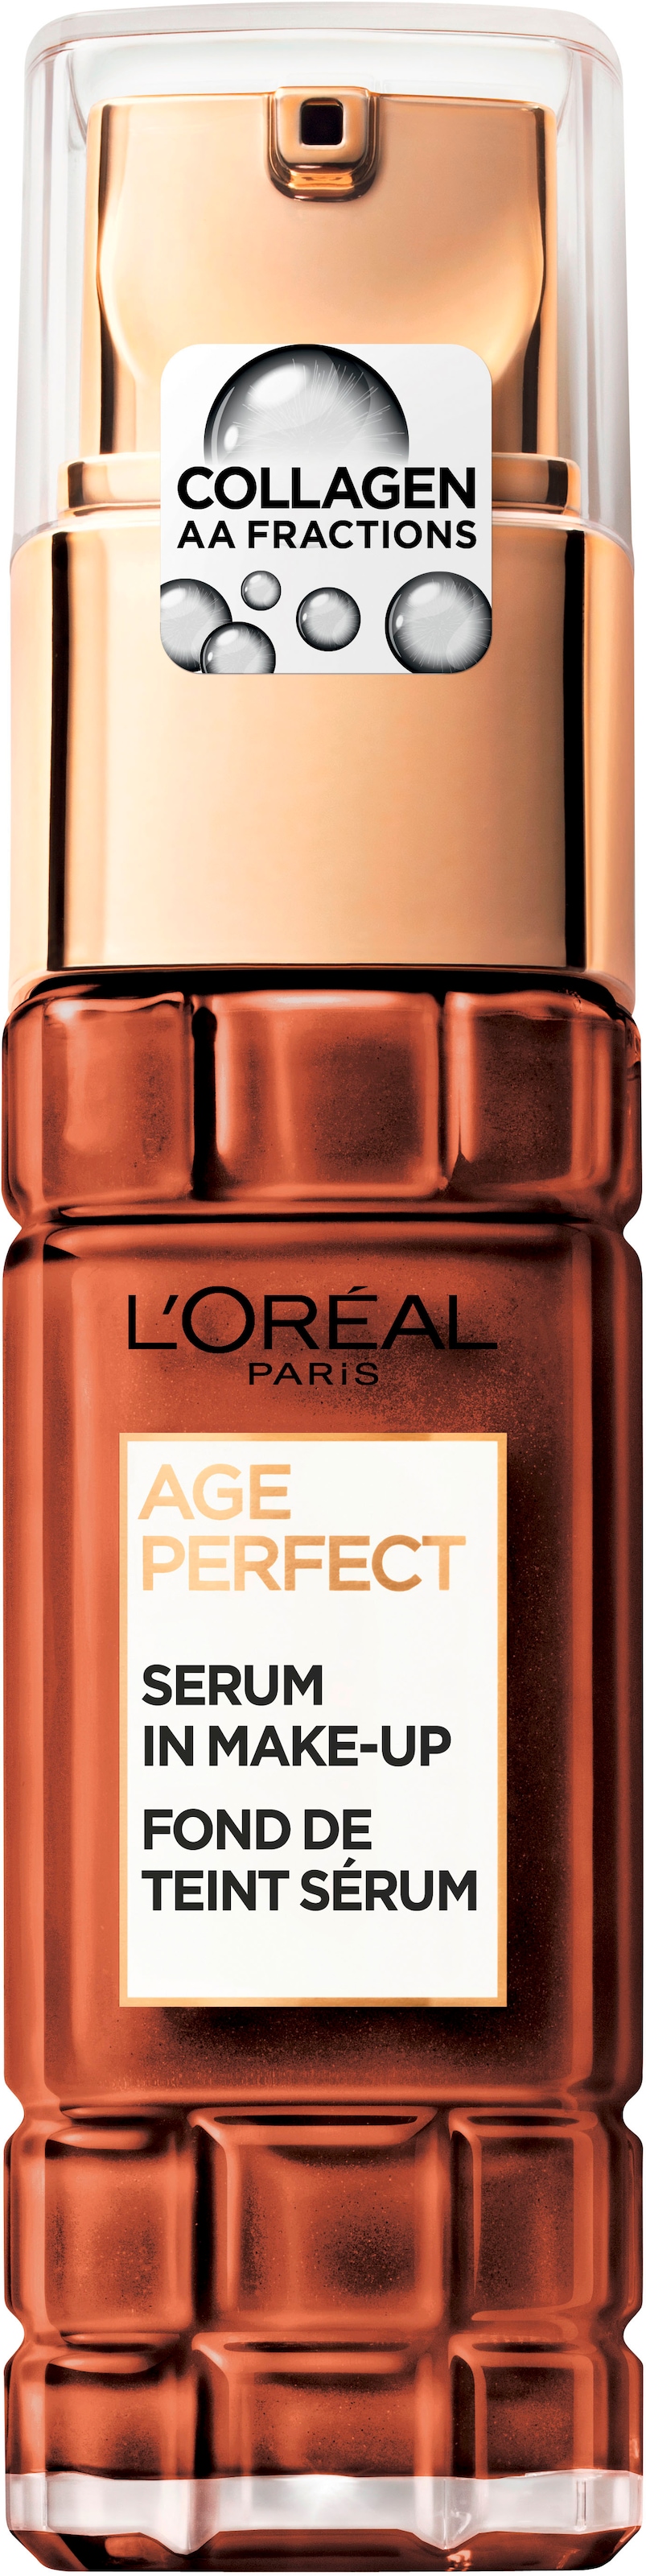 Make-up »Age Perfect Serum in Make-up«